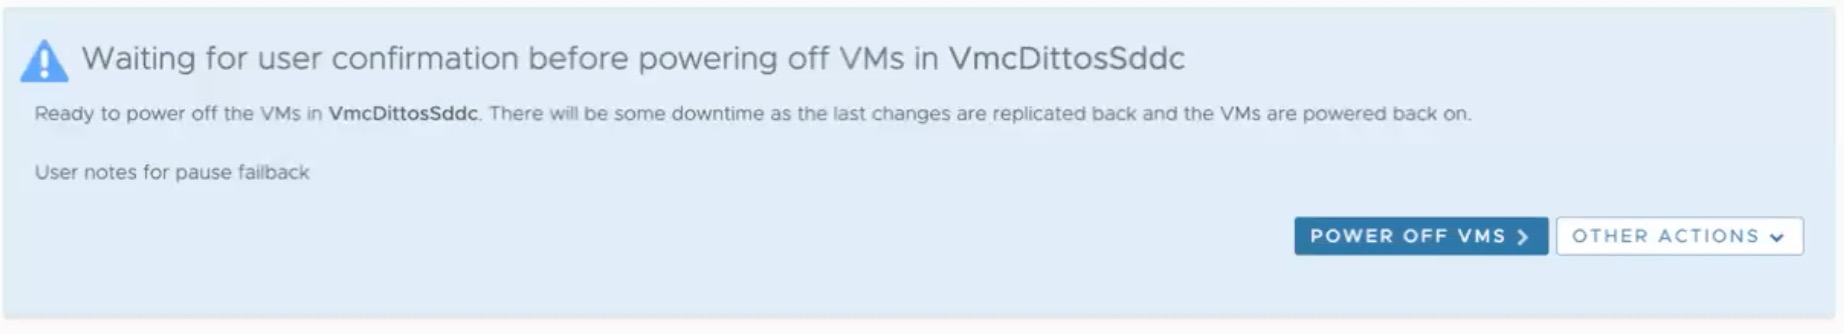 Waiting for user to confirm powering off VMs before failback.